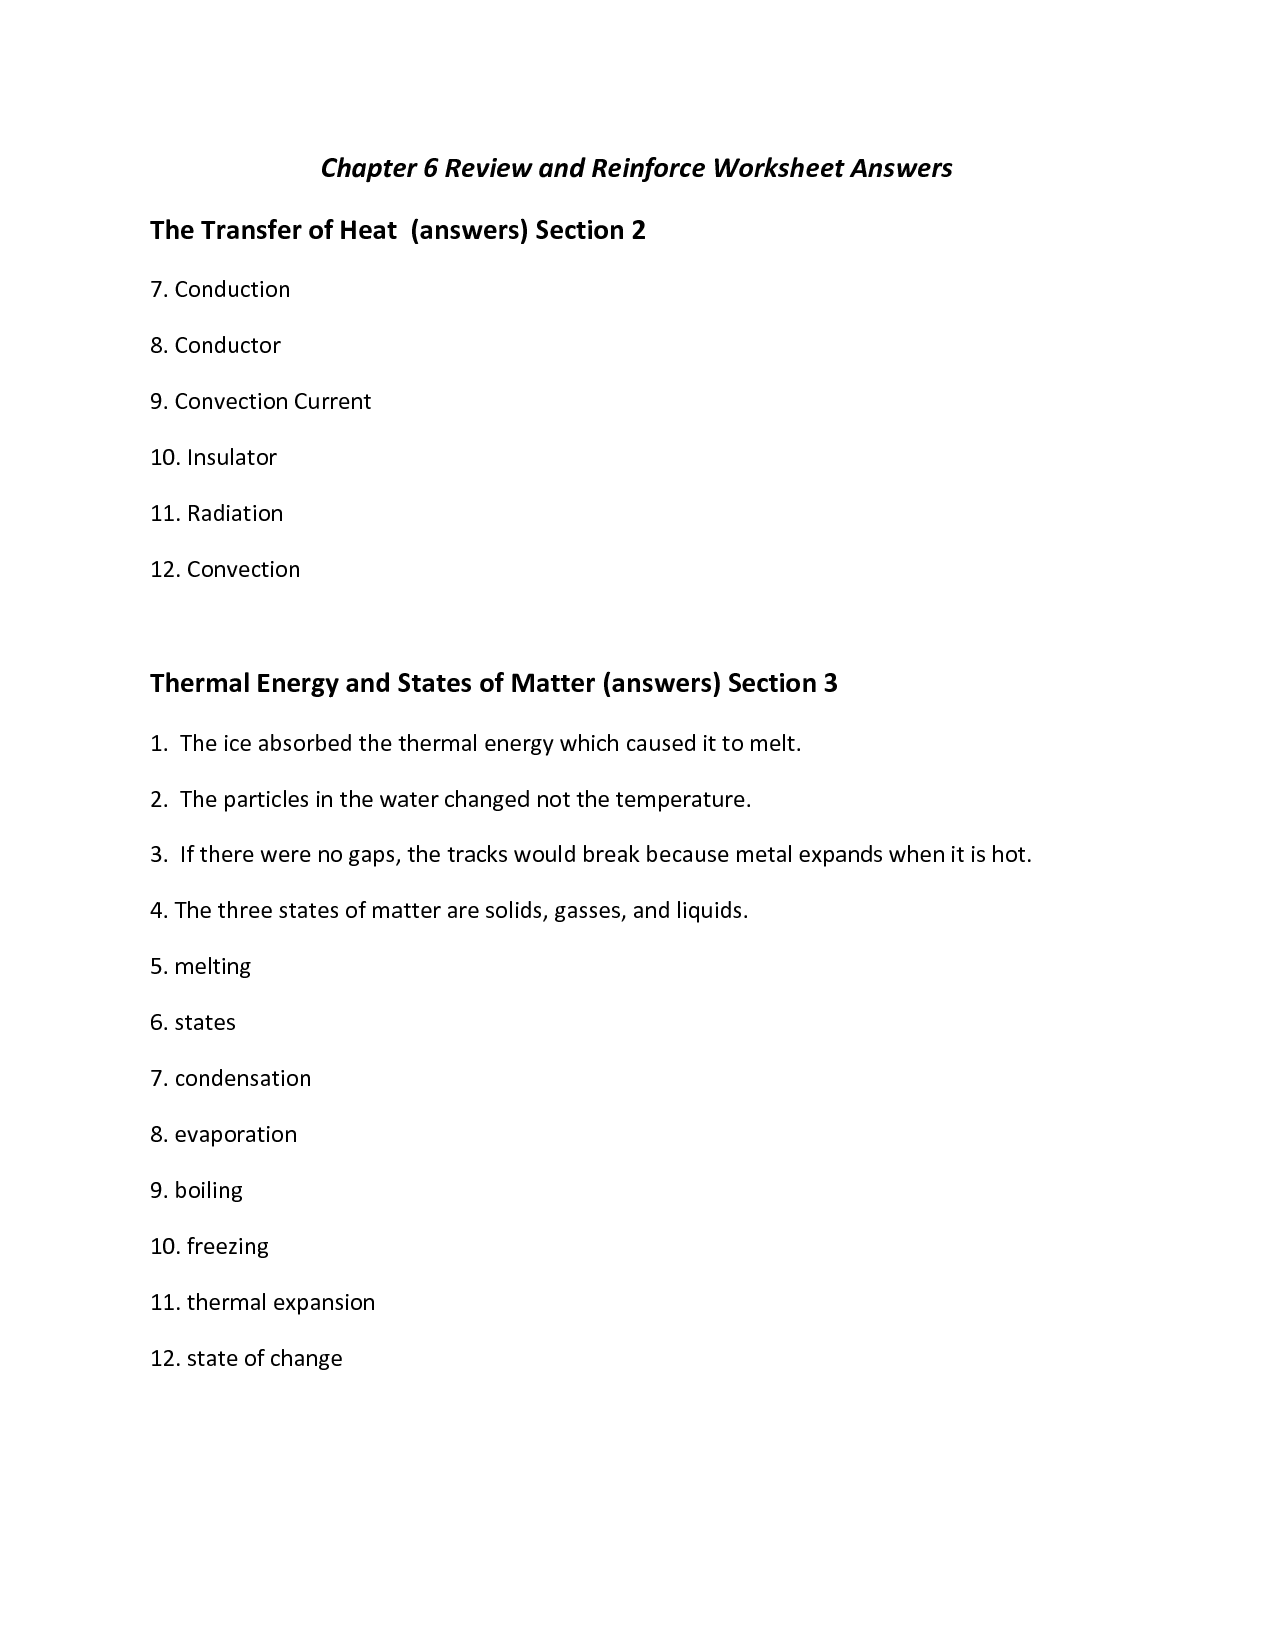 Thermal Energy Transfer Worksheet and Answers